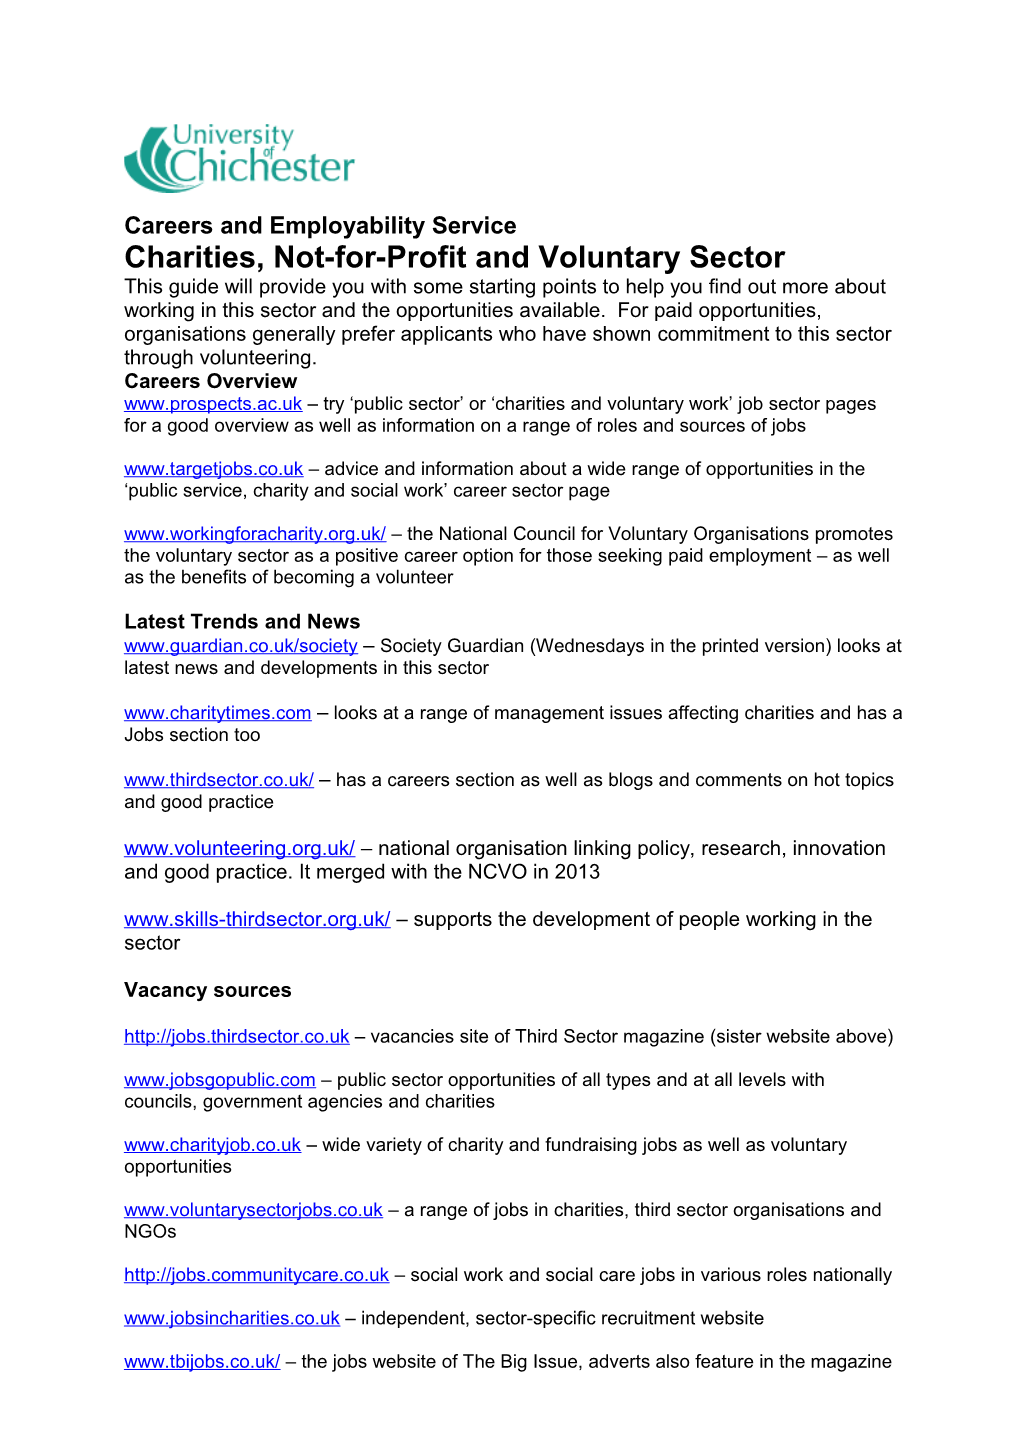 Charities, Not-For-Profit and Voluntary Sector